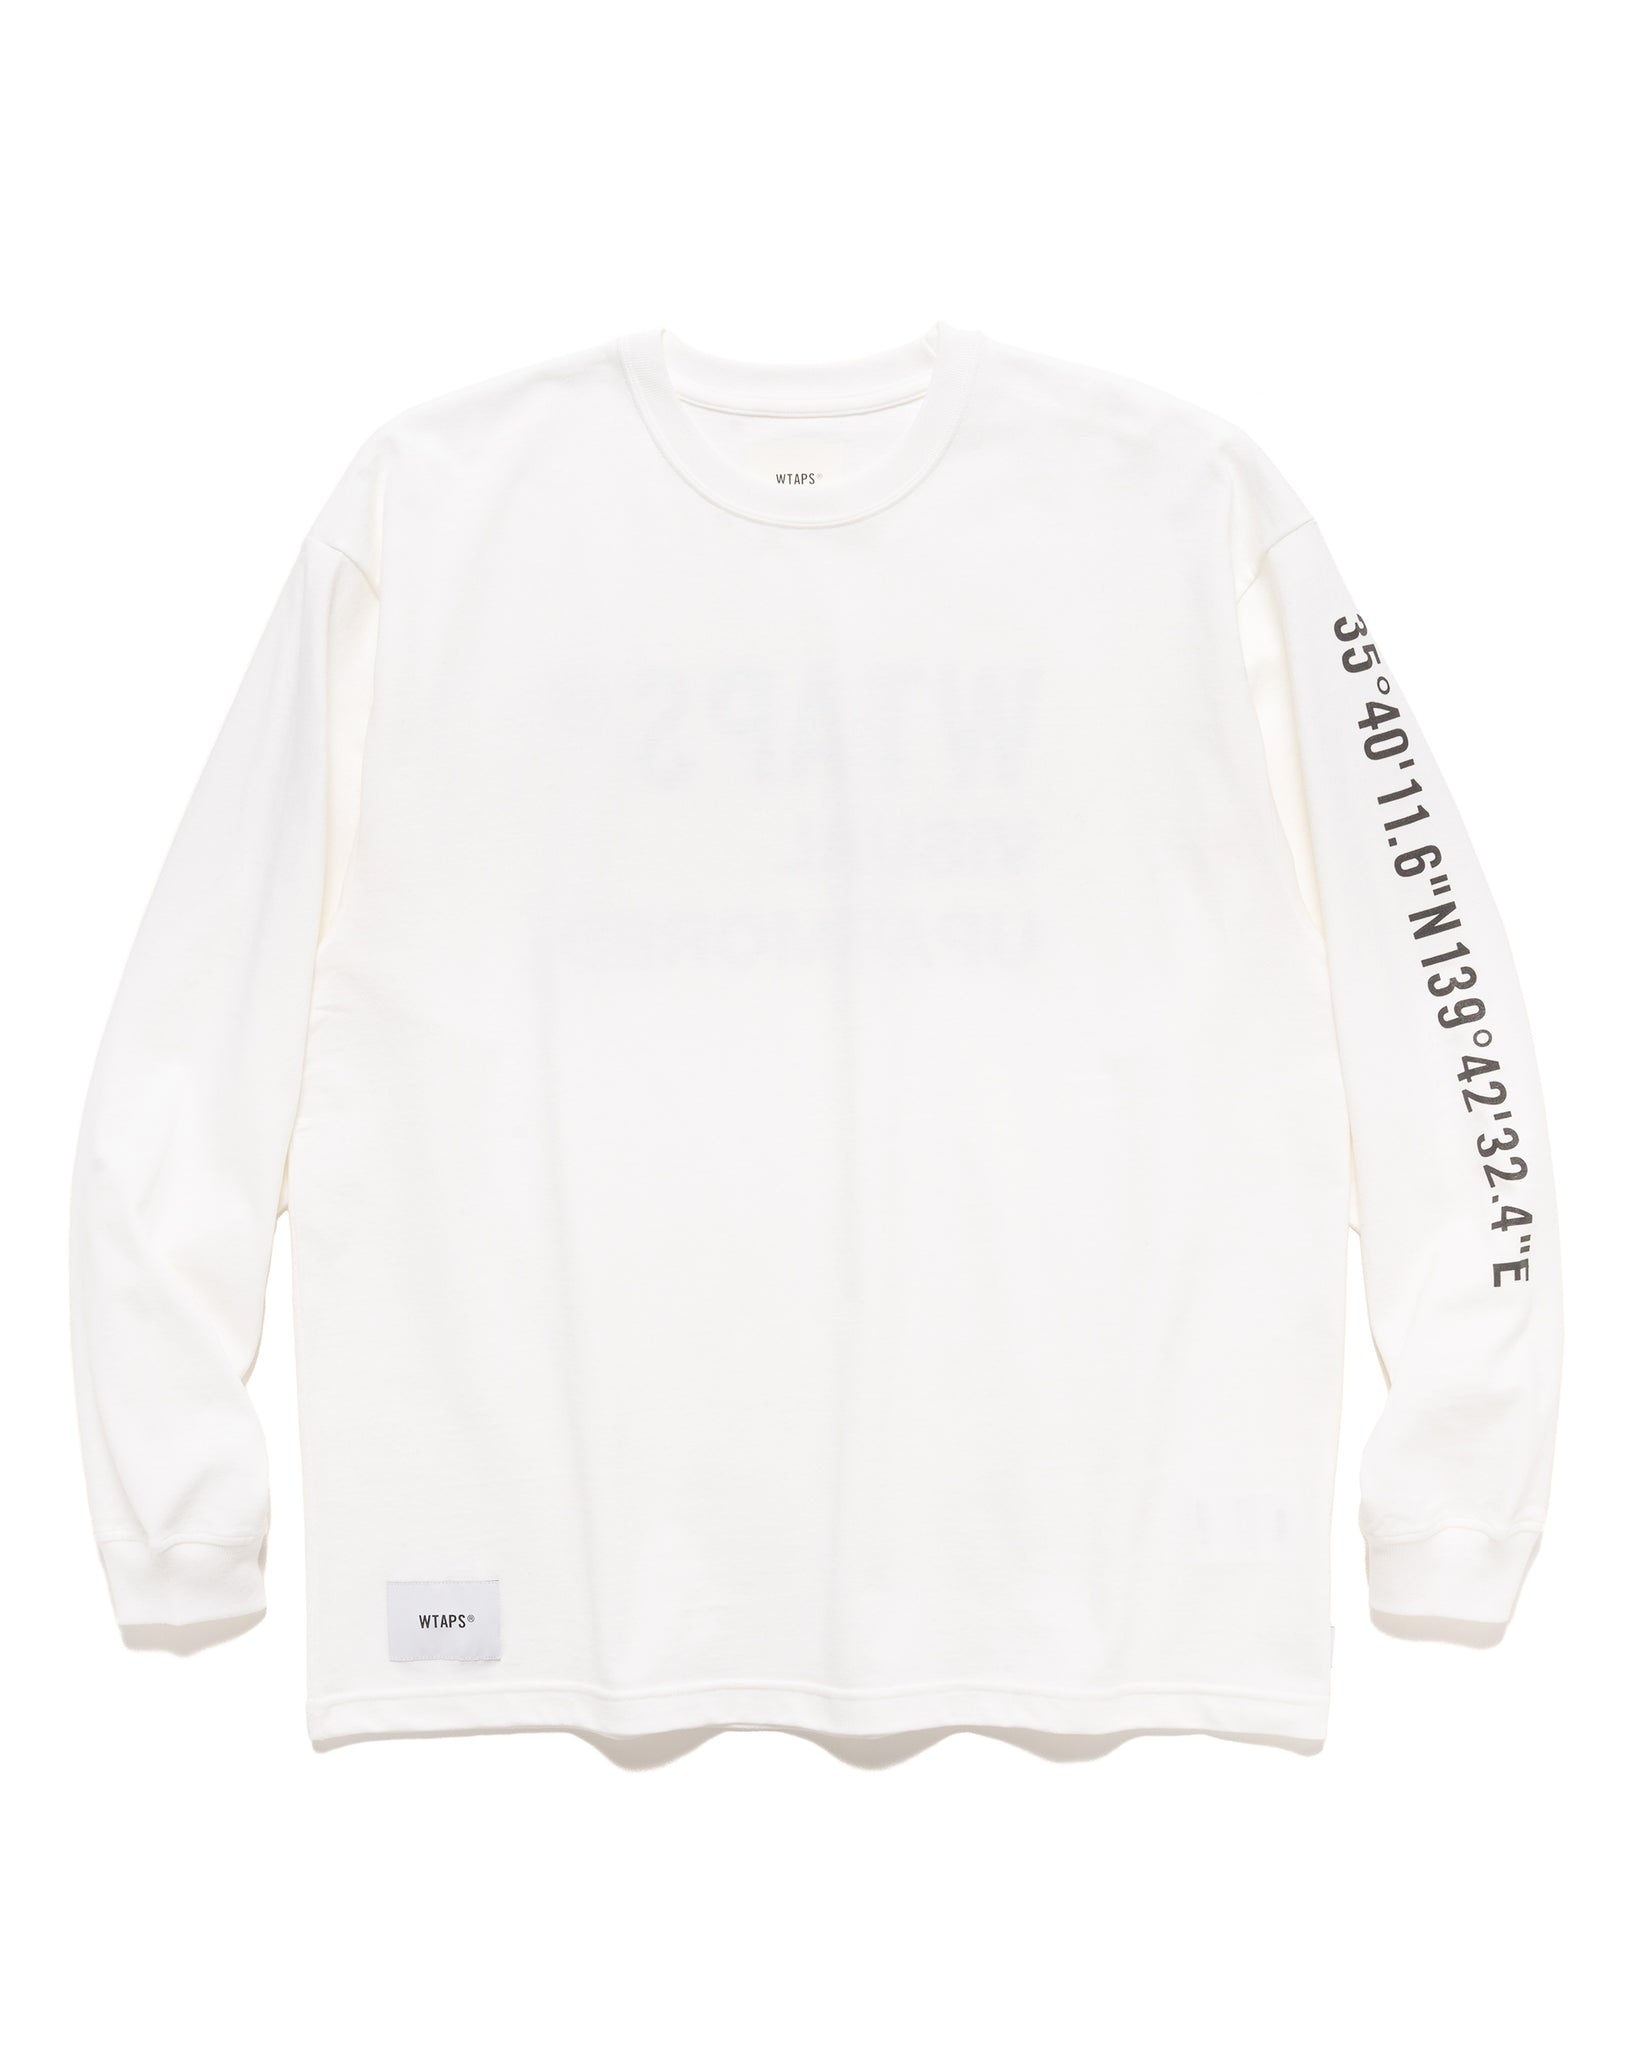 OBJ 03 / LS / Cotton. Fortless Pullover WHITE - 1